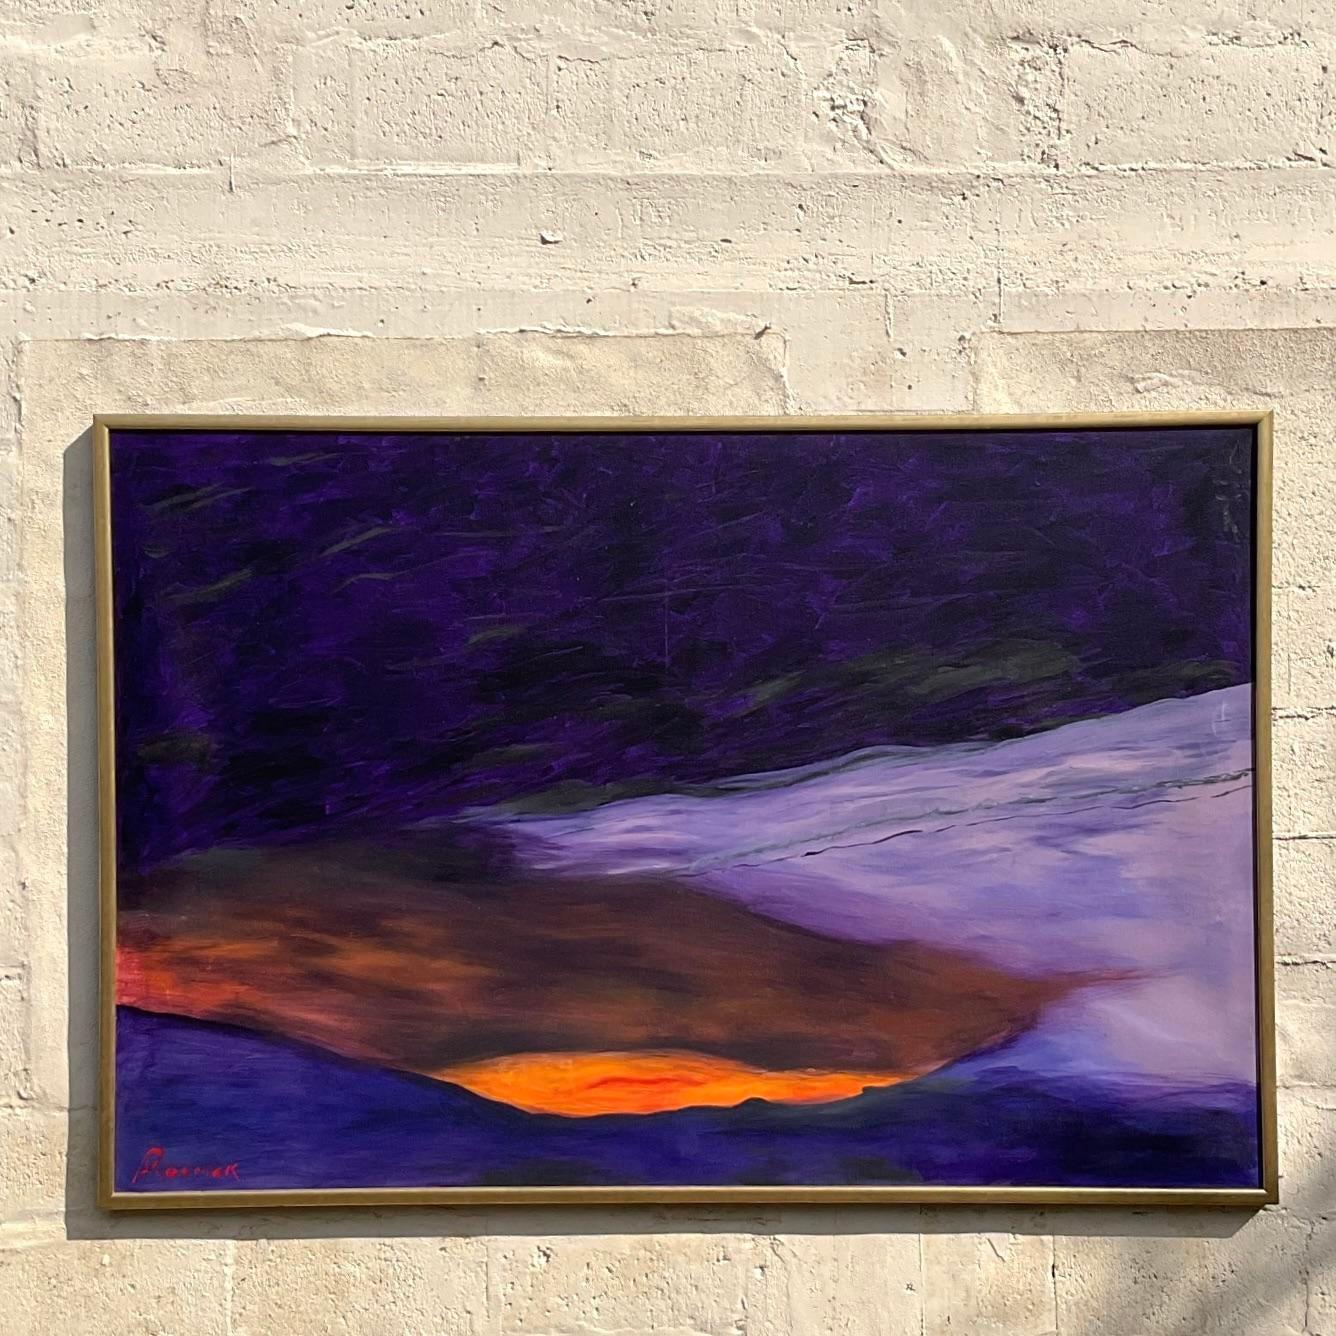 A fabulous vintage Boho original oil on canvas. A chic Abstract Landscape in deep jewel tones. Signed by the artist. Acquired from a Palm Beach estate.